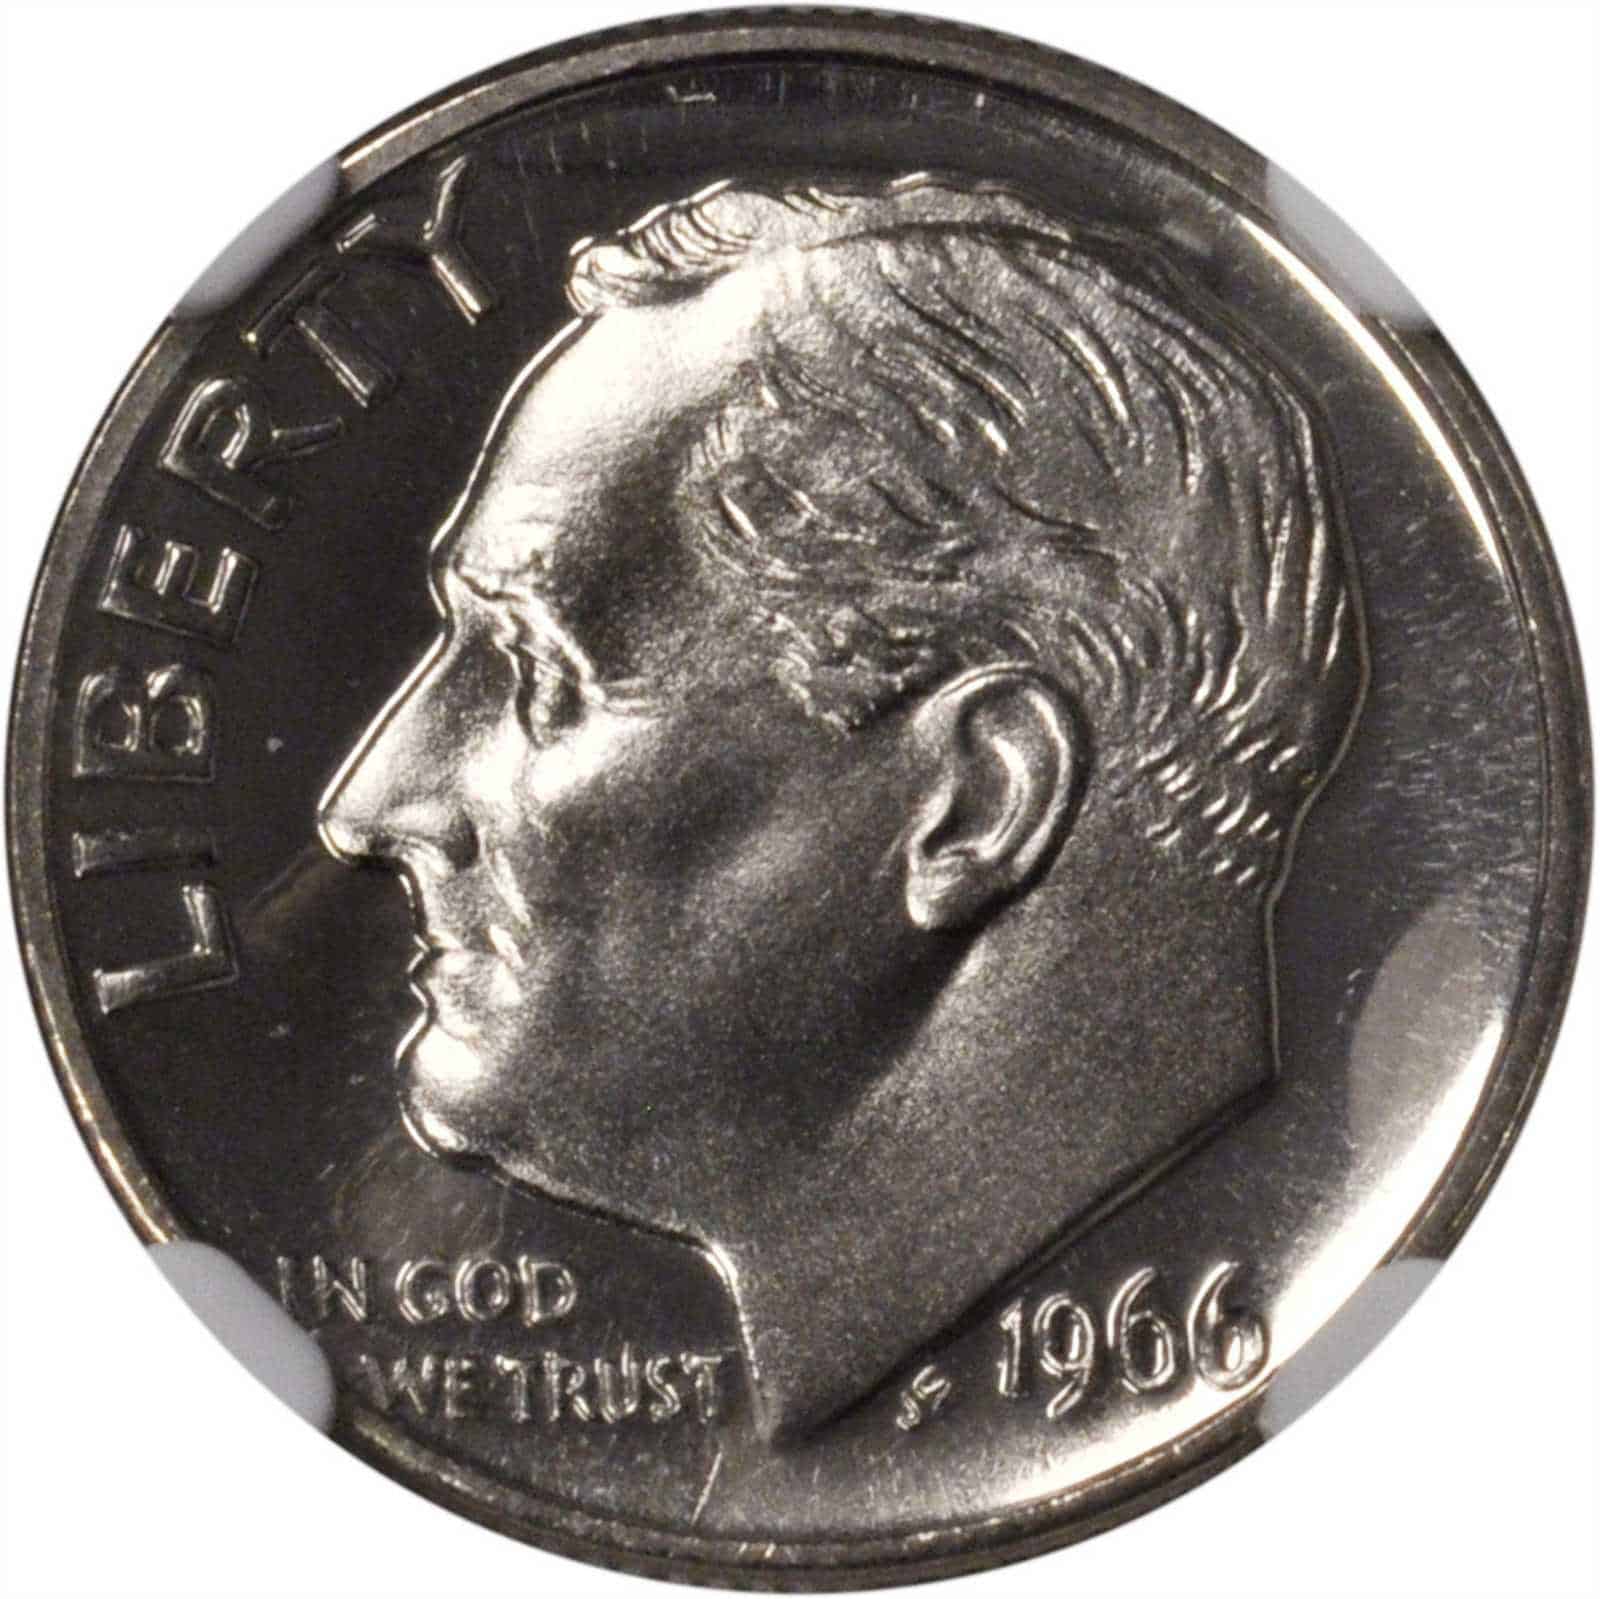 The Obverse of the 1966 Dime